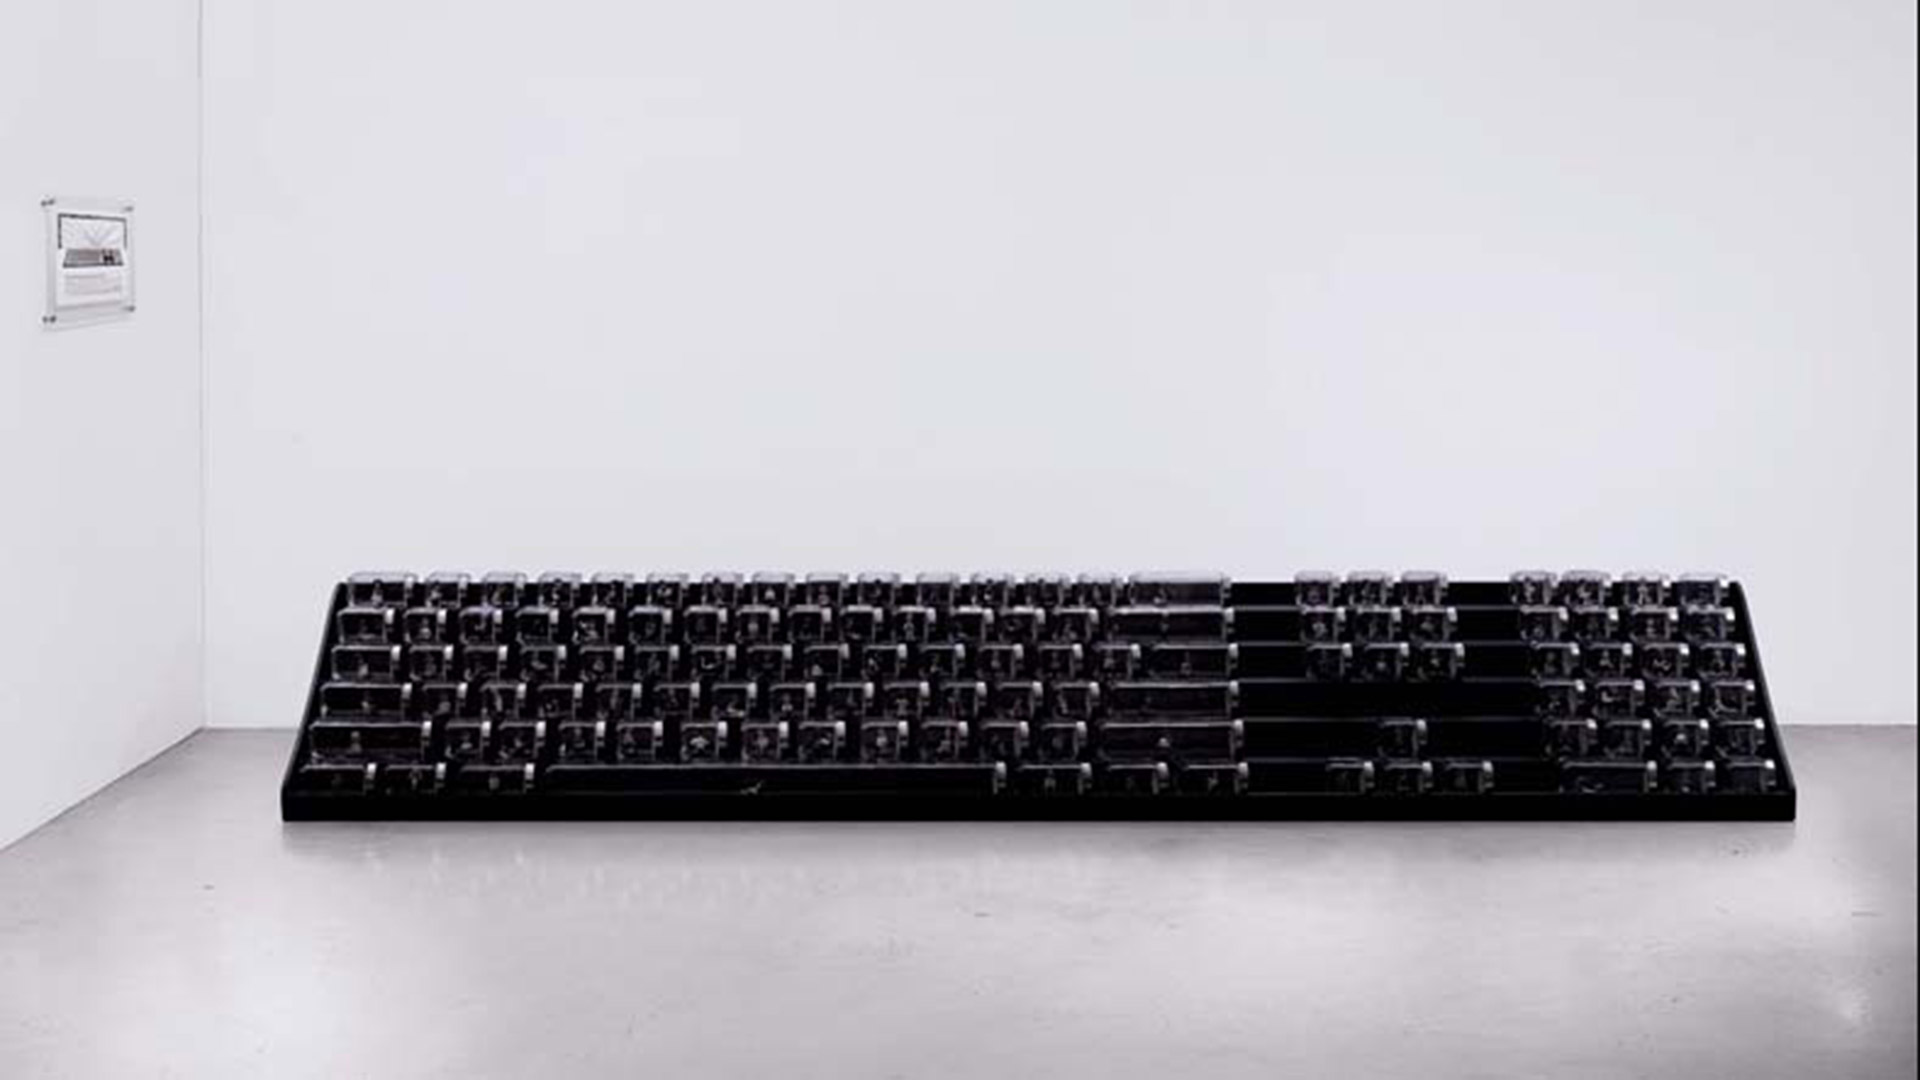 The Keyboard of Isolation